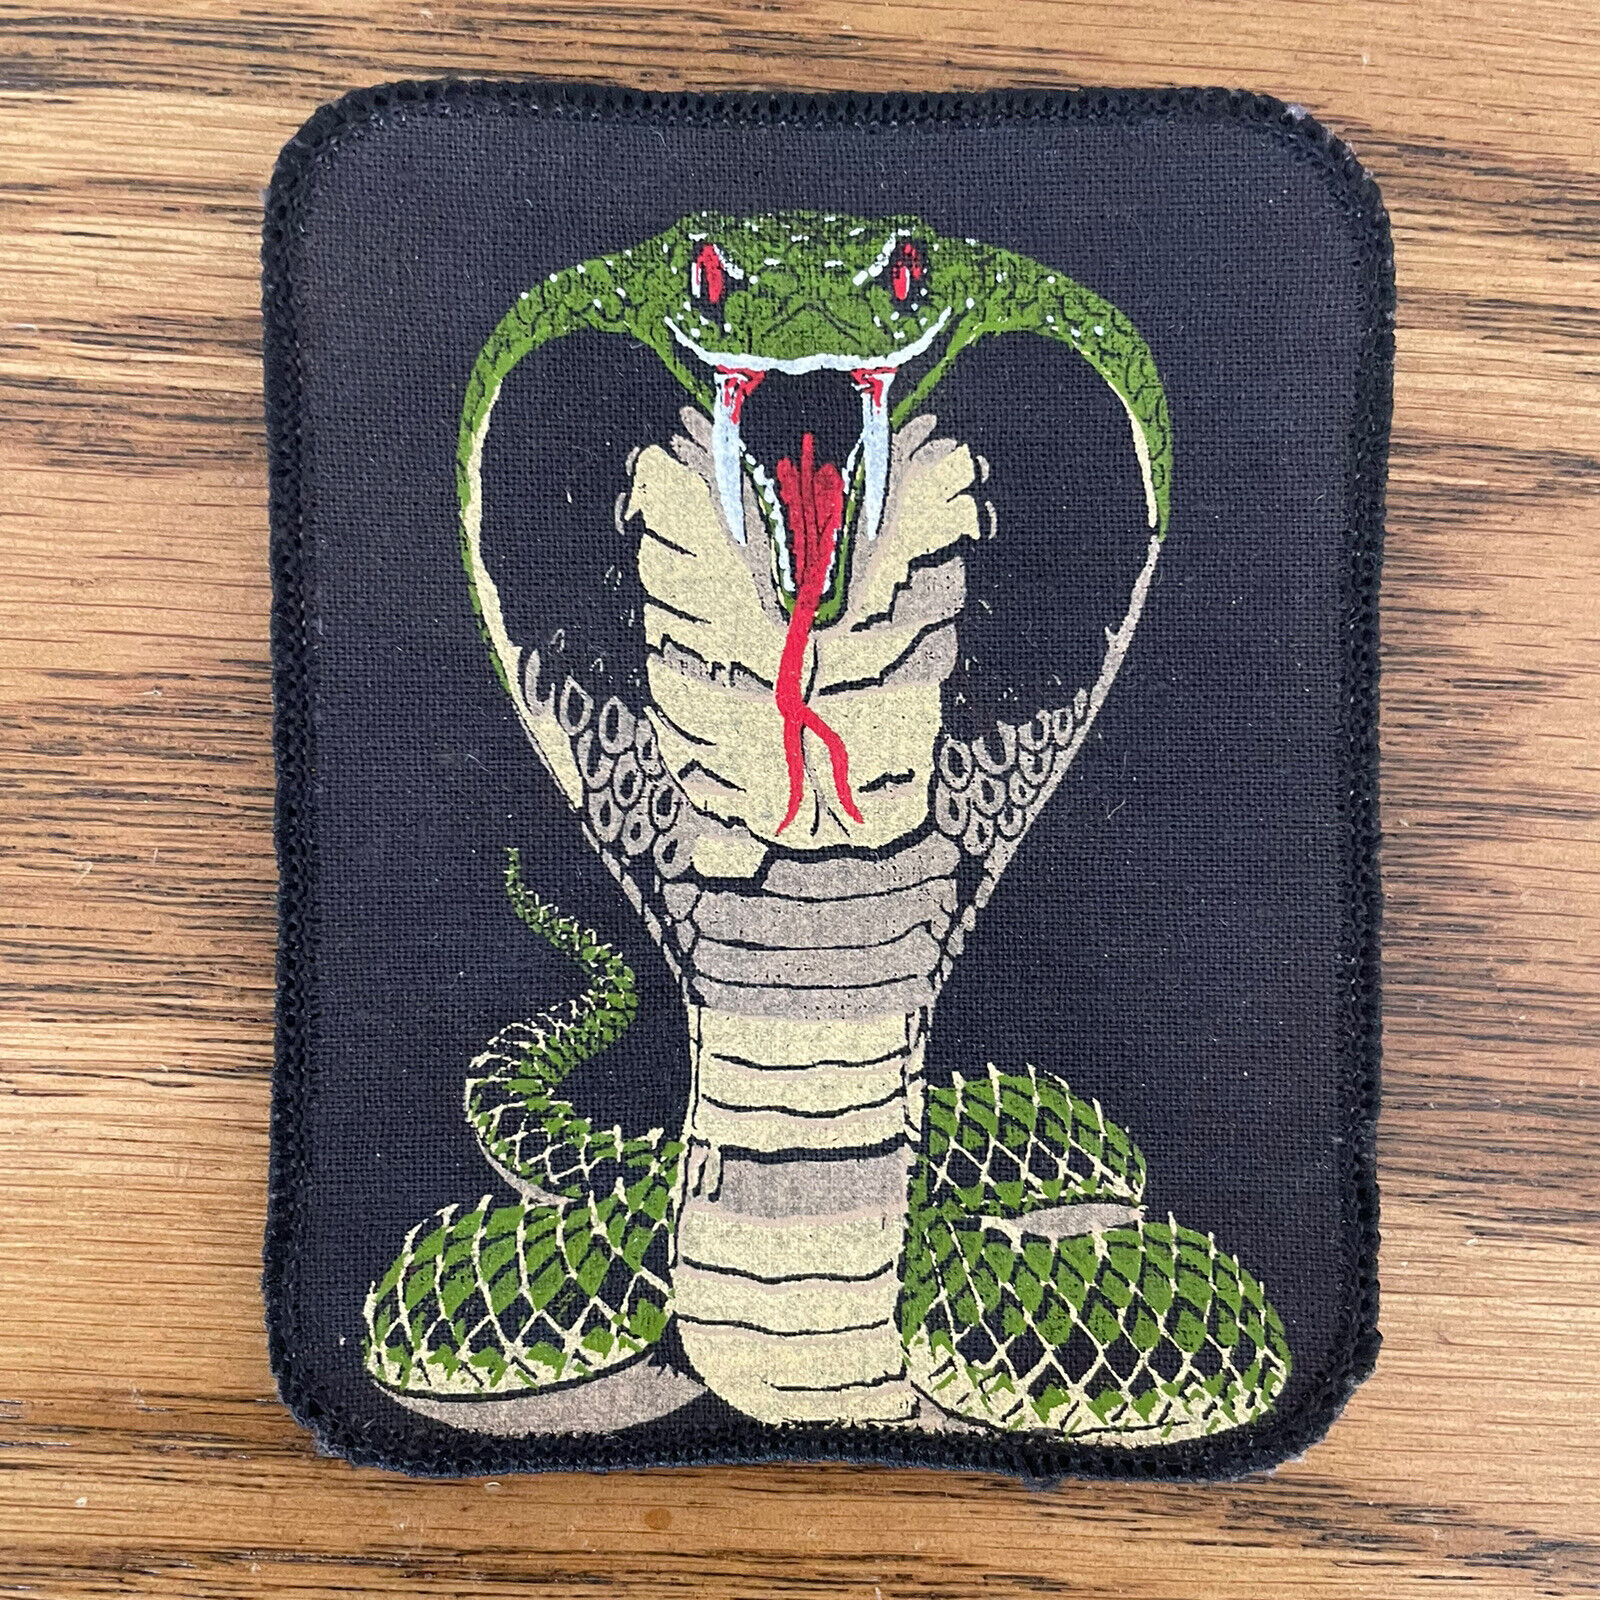 Vintage Sew-On Military Biker Patch King Cobra Snake Black 3in x 4in - Italy